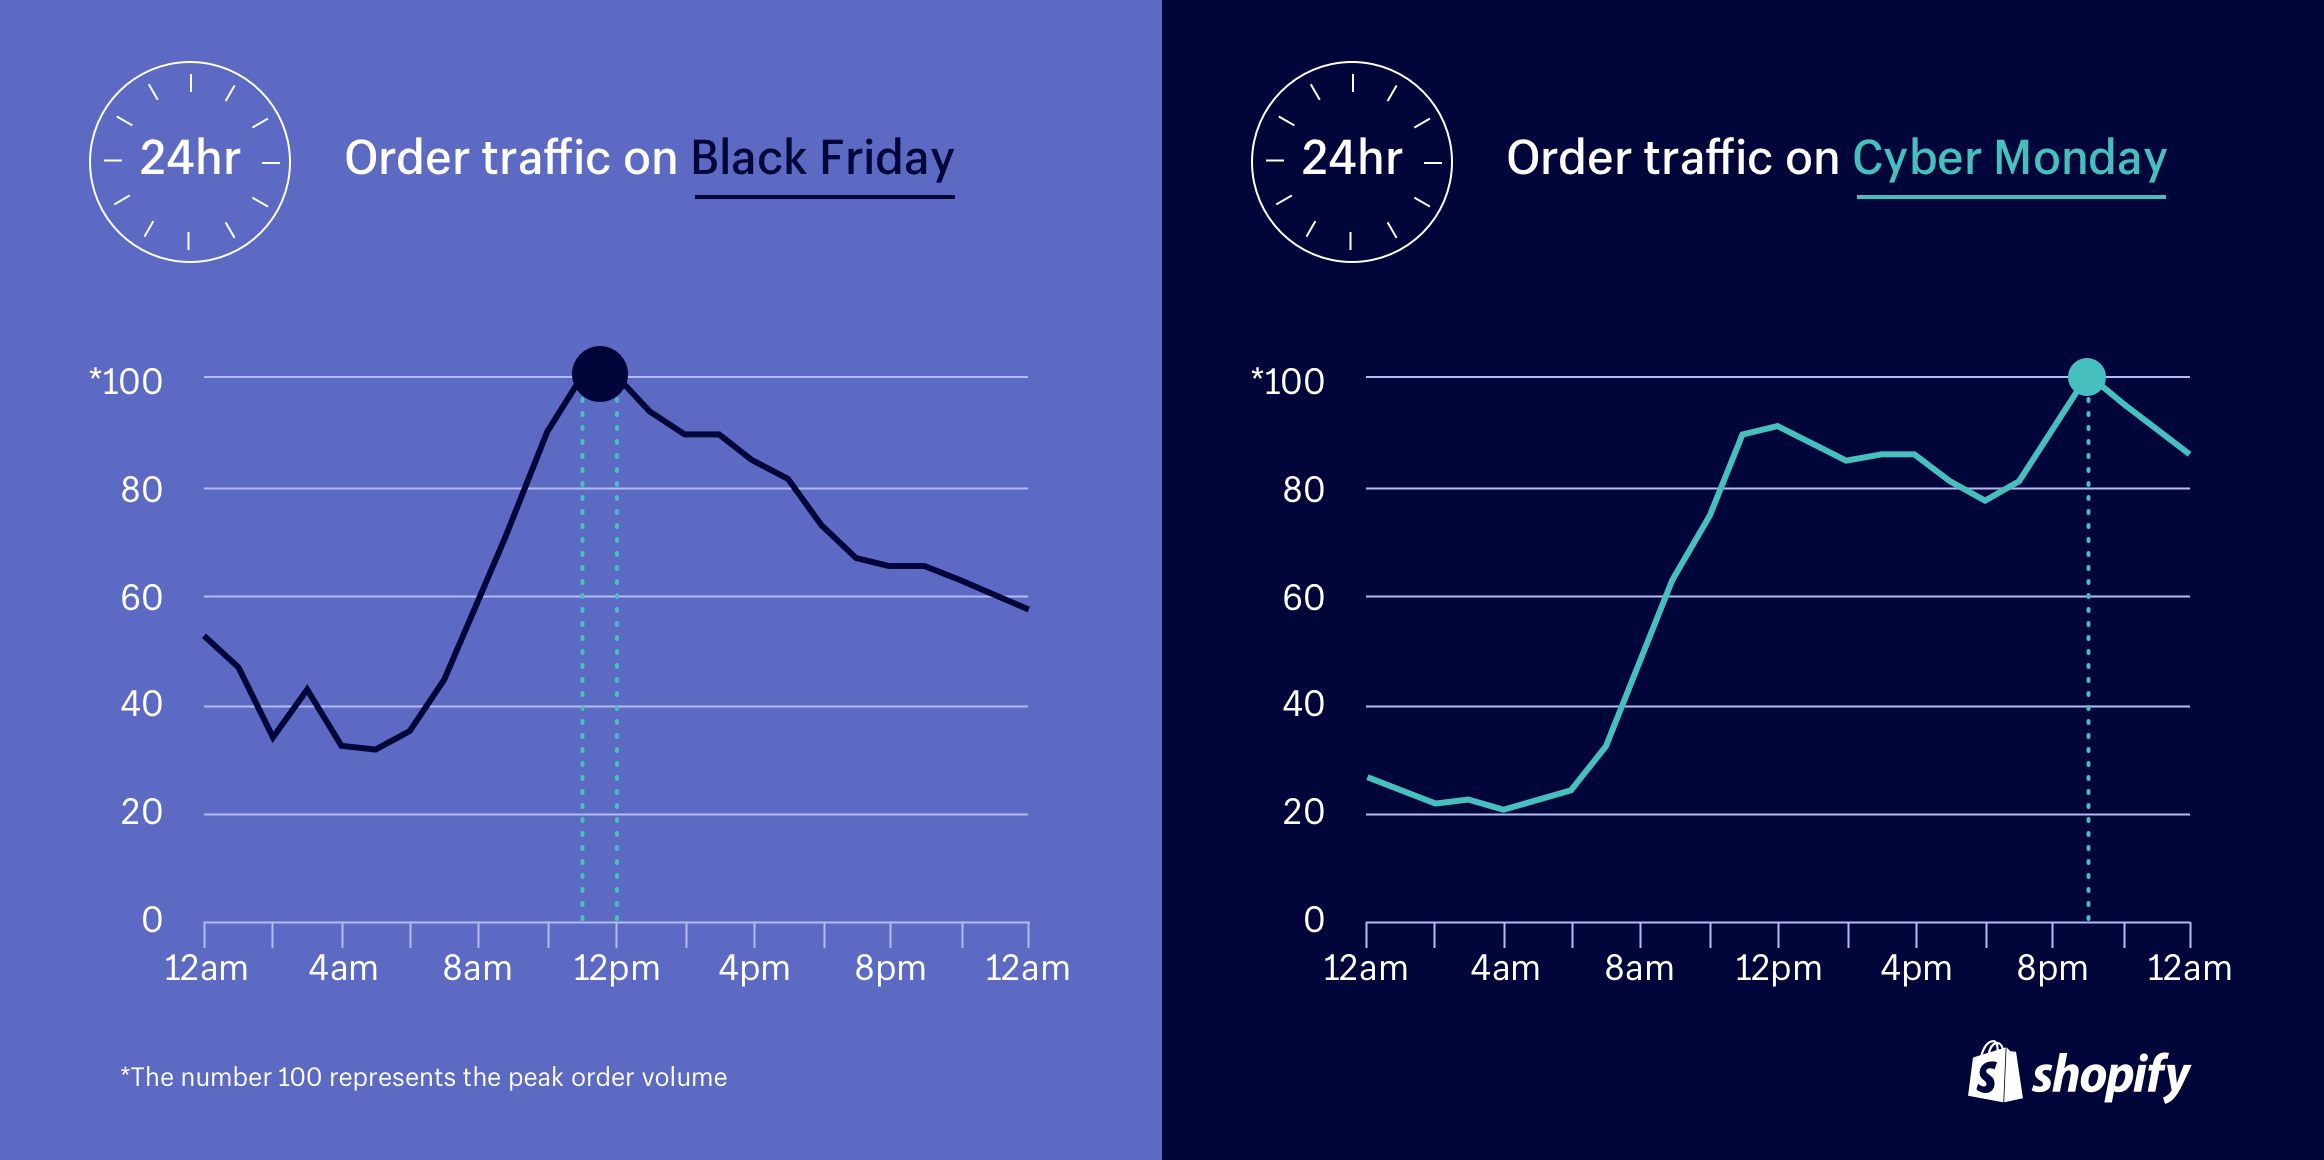 Peak shopping hours during Black Friday Cyber Monday.